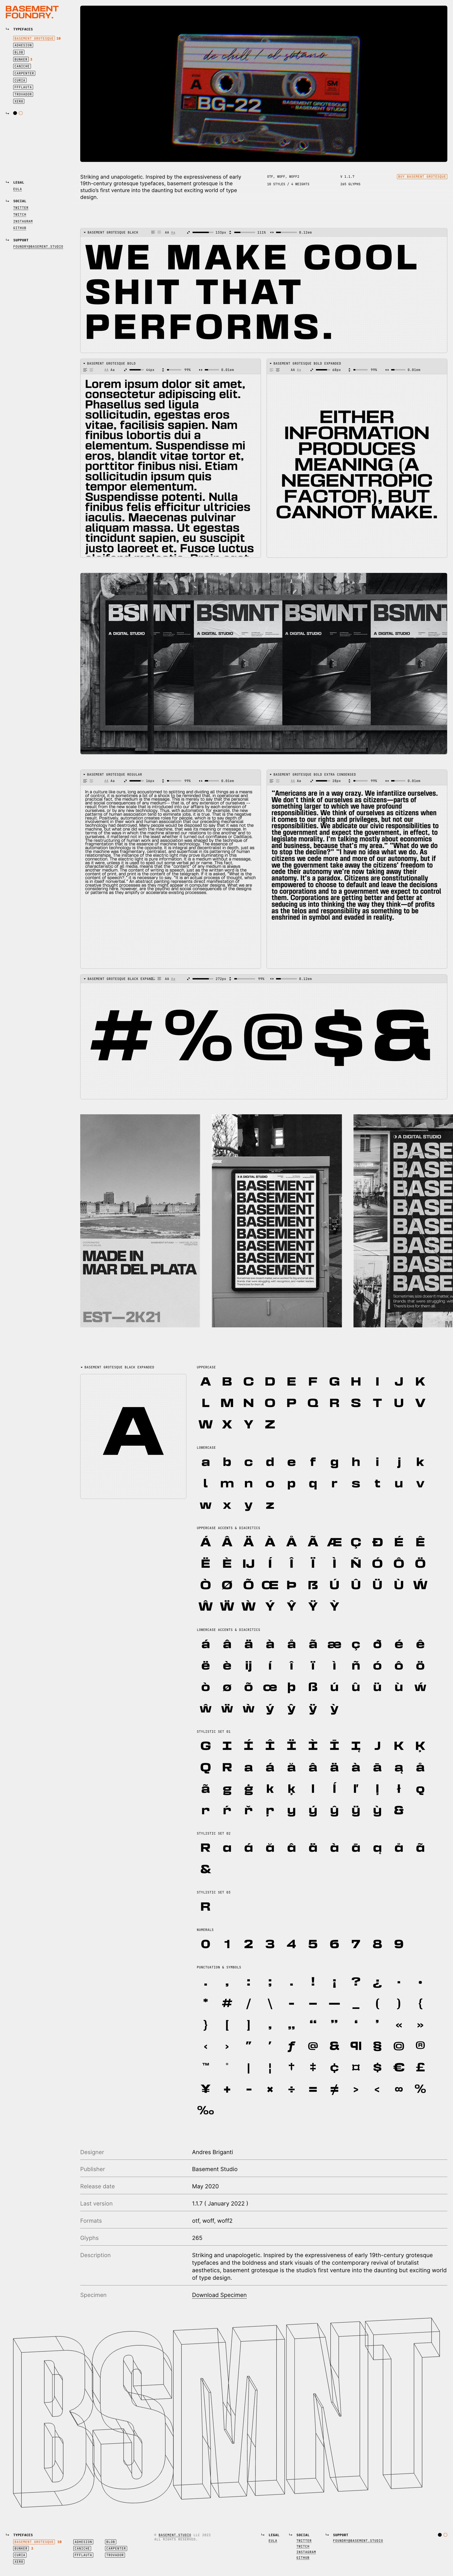 BASEMENT FOUNDRY Landing Page Example: Shop our catalog of distinguished & ever-evolving typefaces — every glyph has been carefully crafted with obsessive attention to detail, ready to use on your next big project.